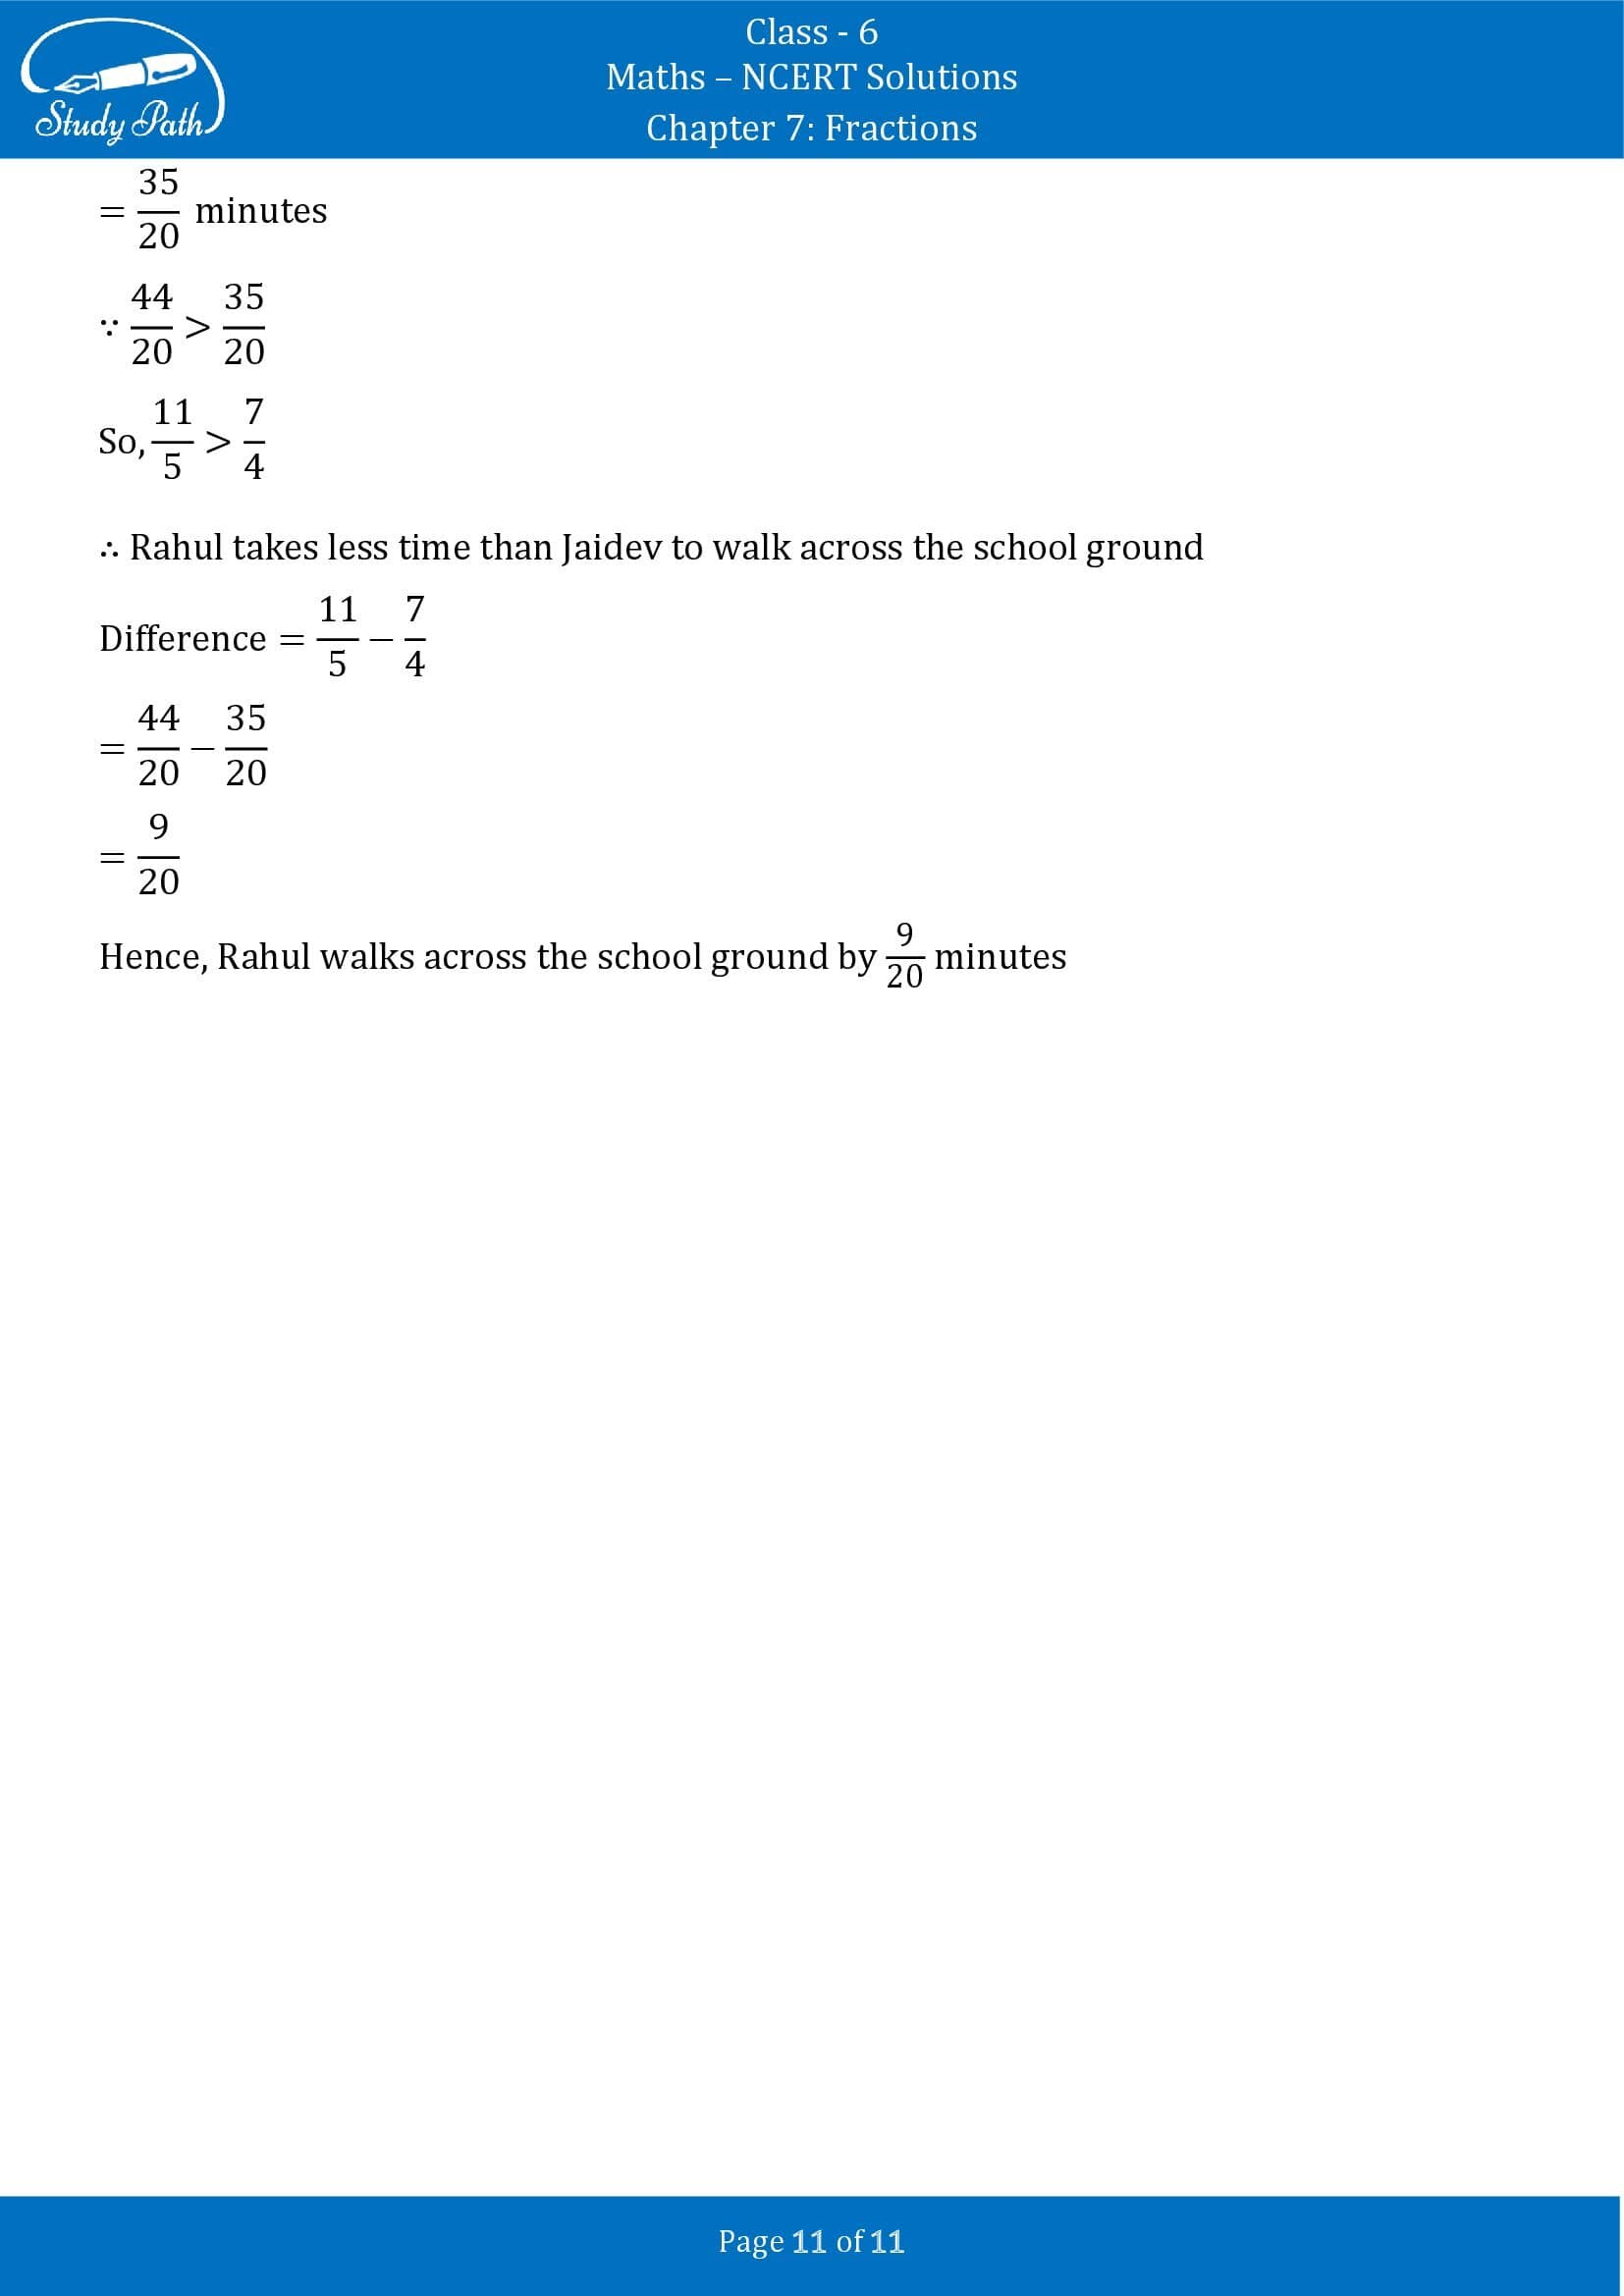 NCERT Solutions for Class 6 Maths Chapter 7 Fractions Exercise 7.6 0011